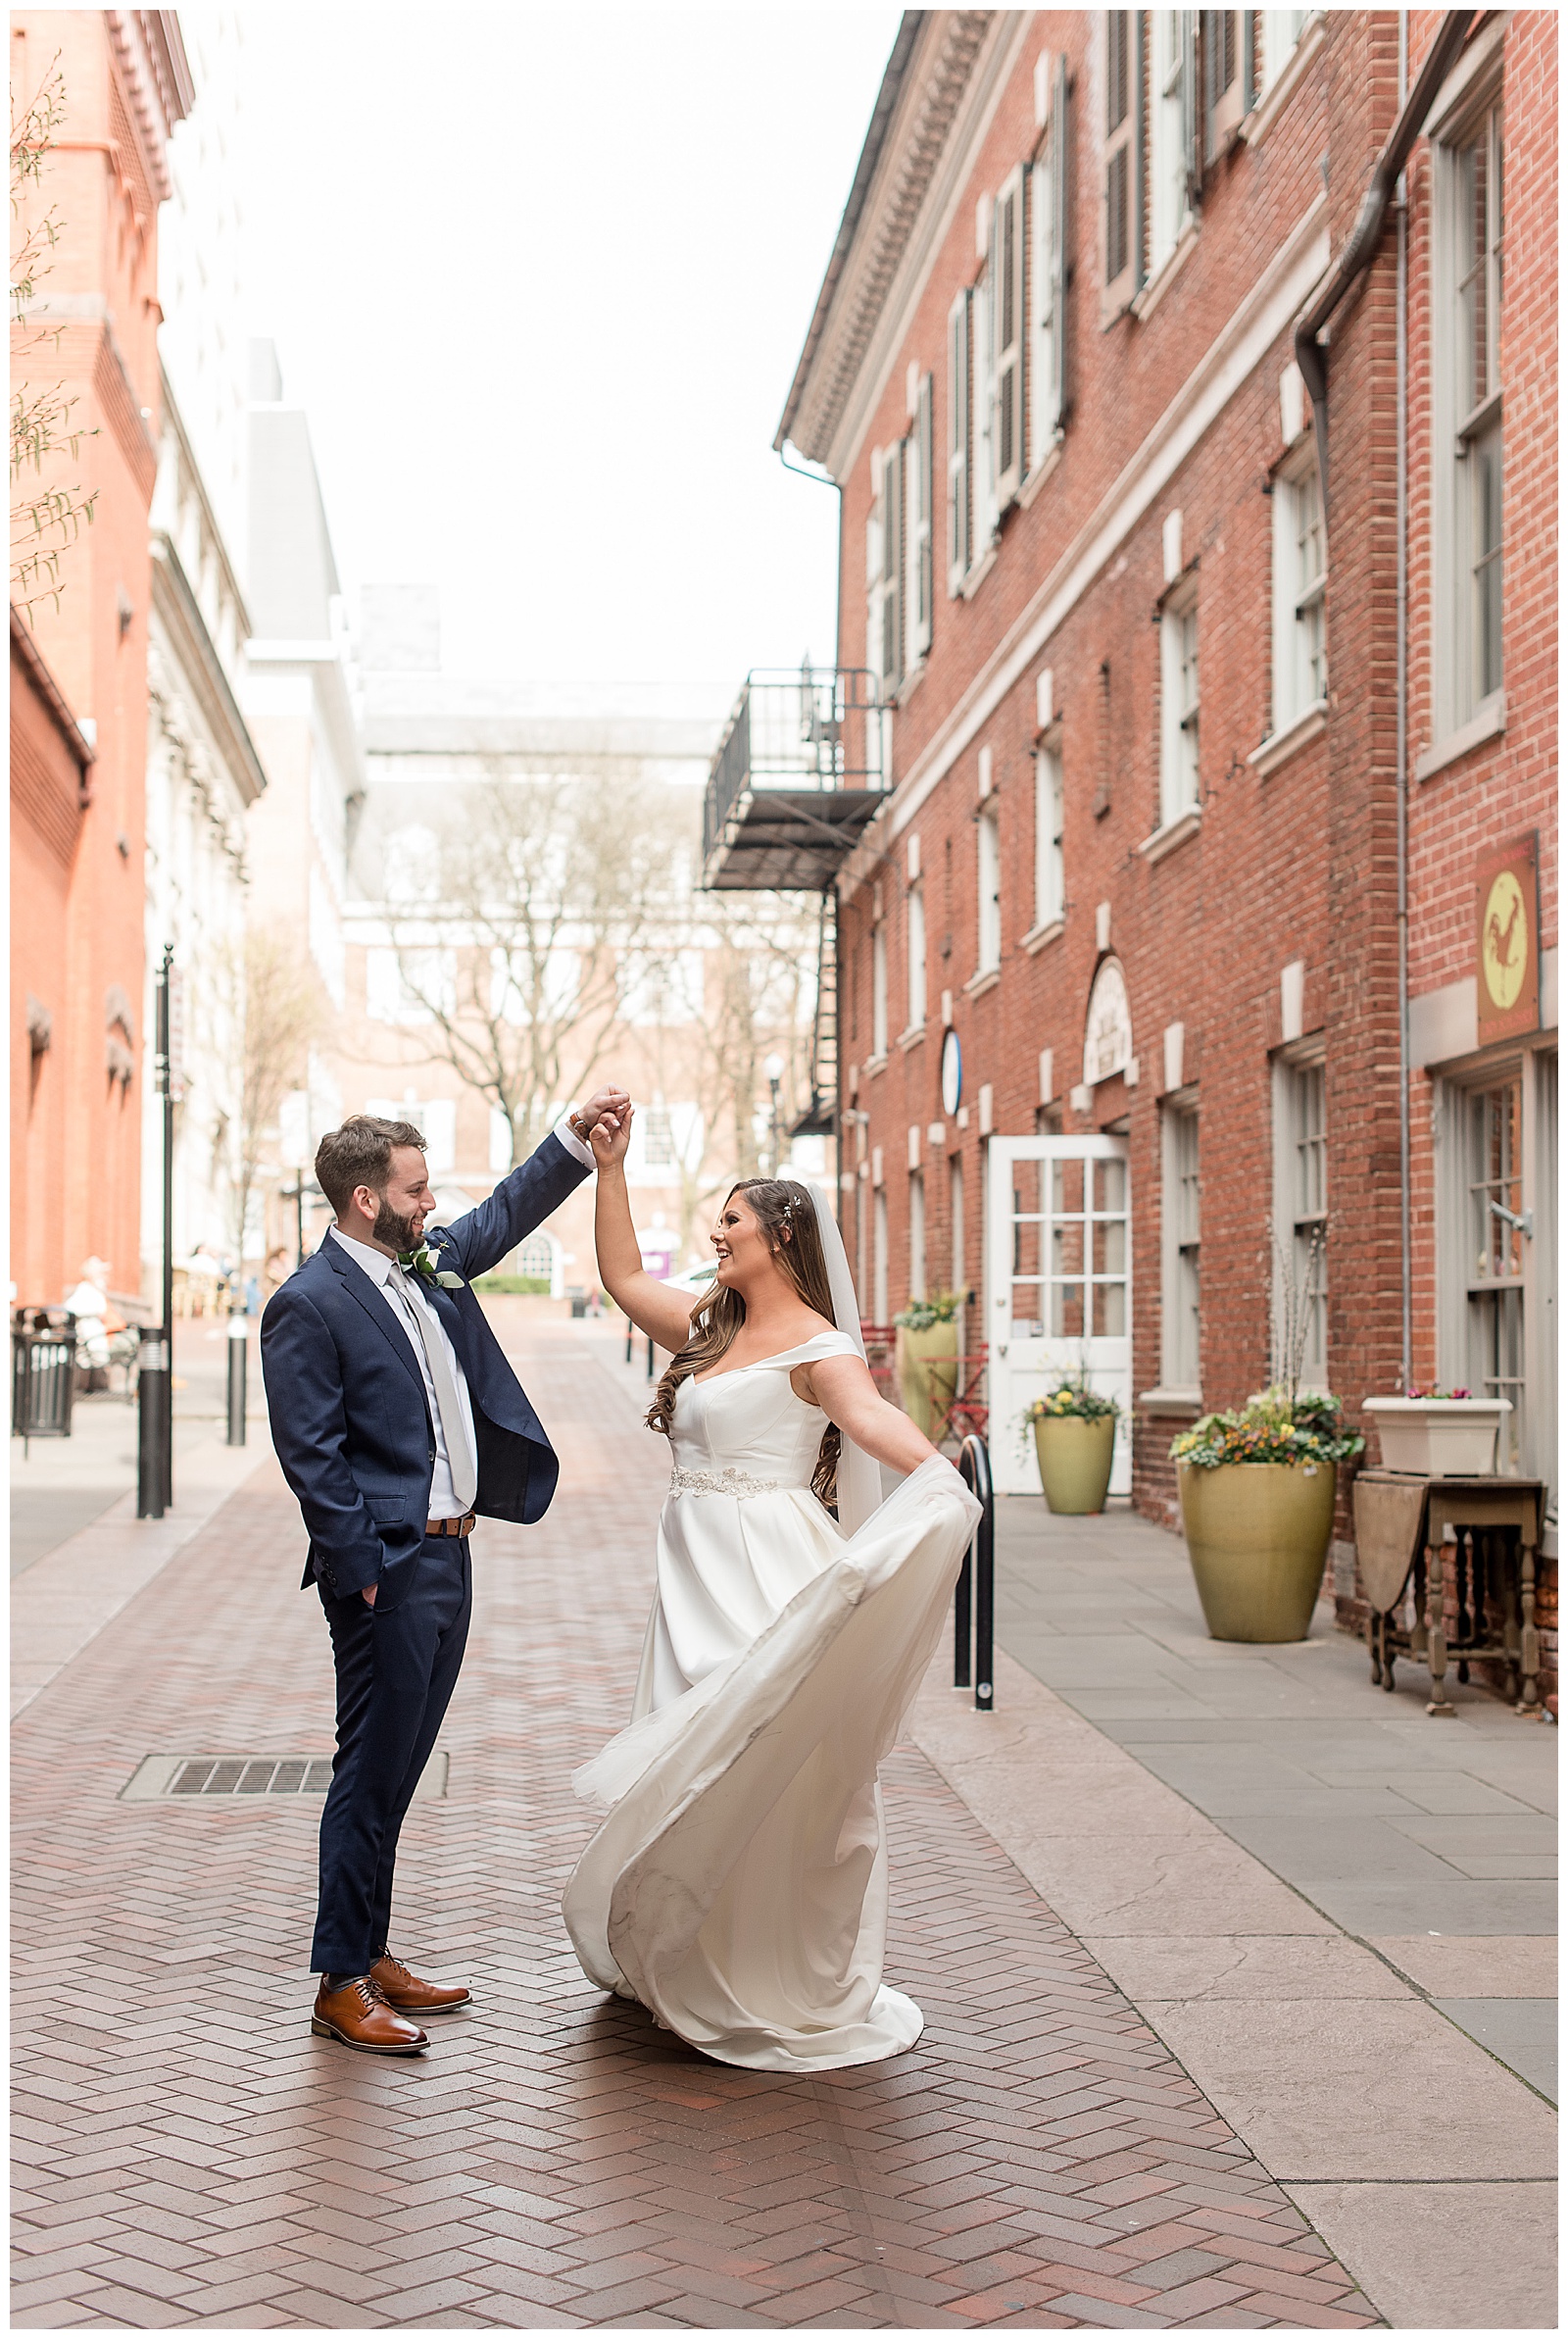 groom twirls bride as she flairs her bridal gown train on cobblestone street by central market